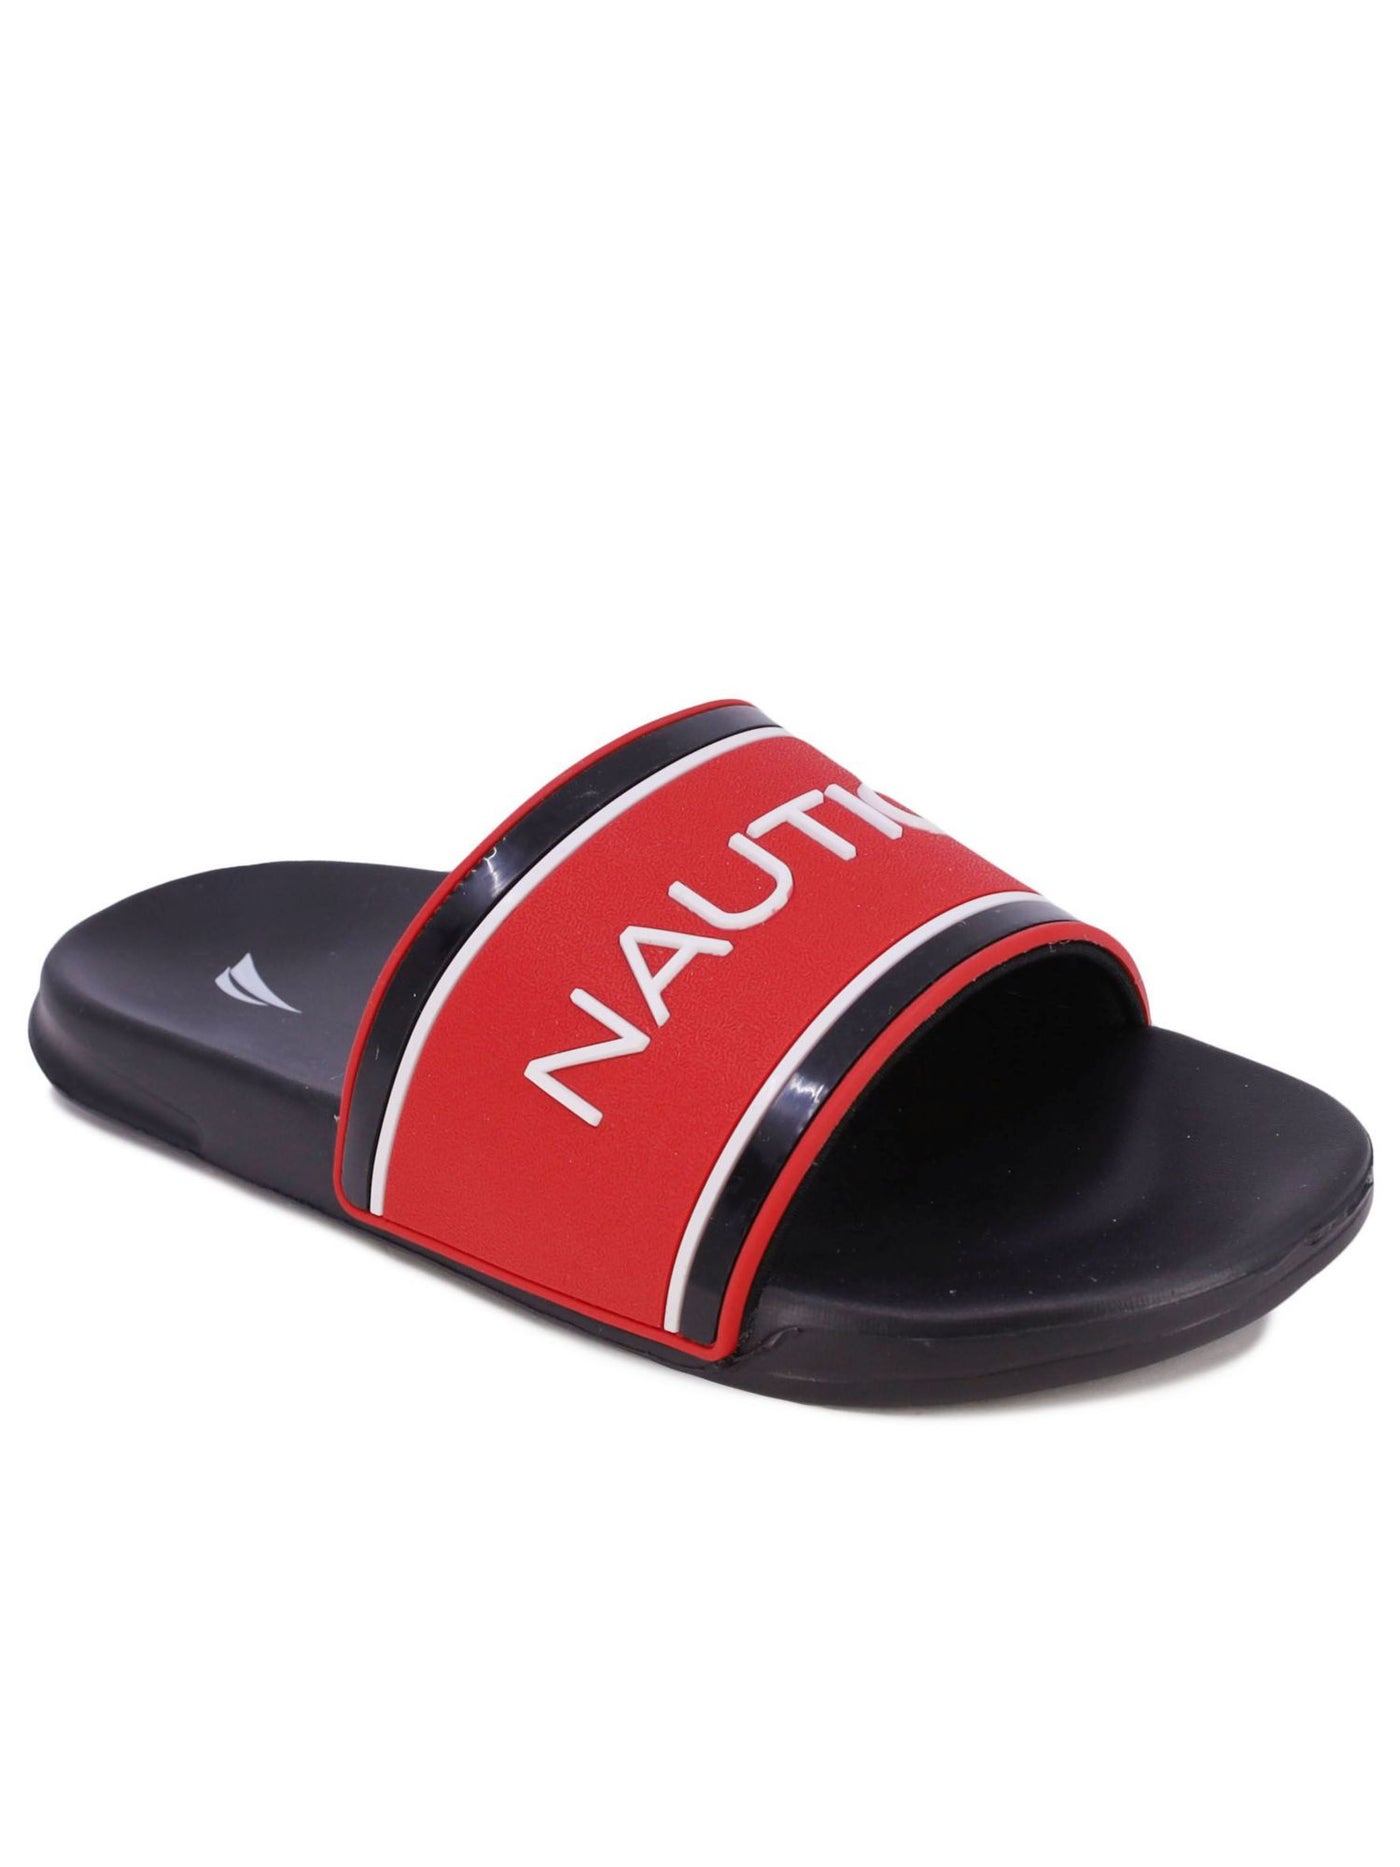 NAUTICA Mens Red Color Block Padded Cortlan Open Toe Slip On Slide Sandals Shoes 10